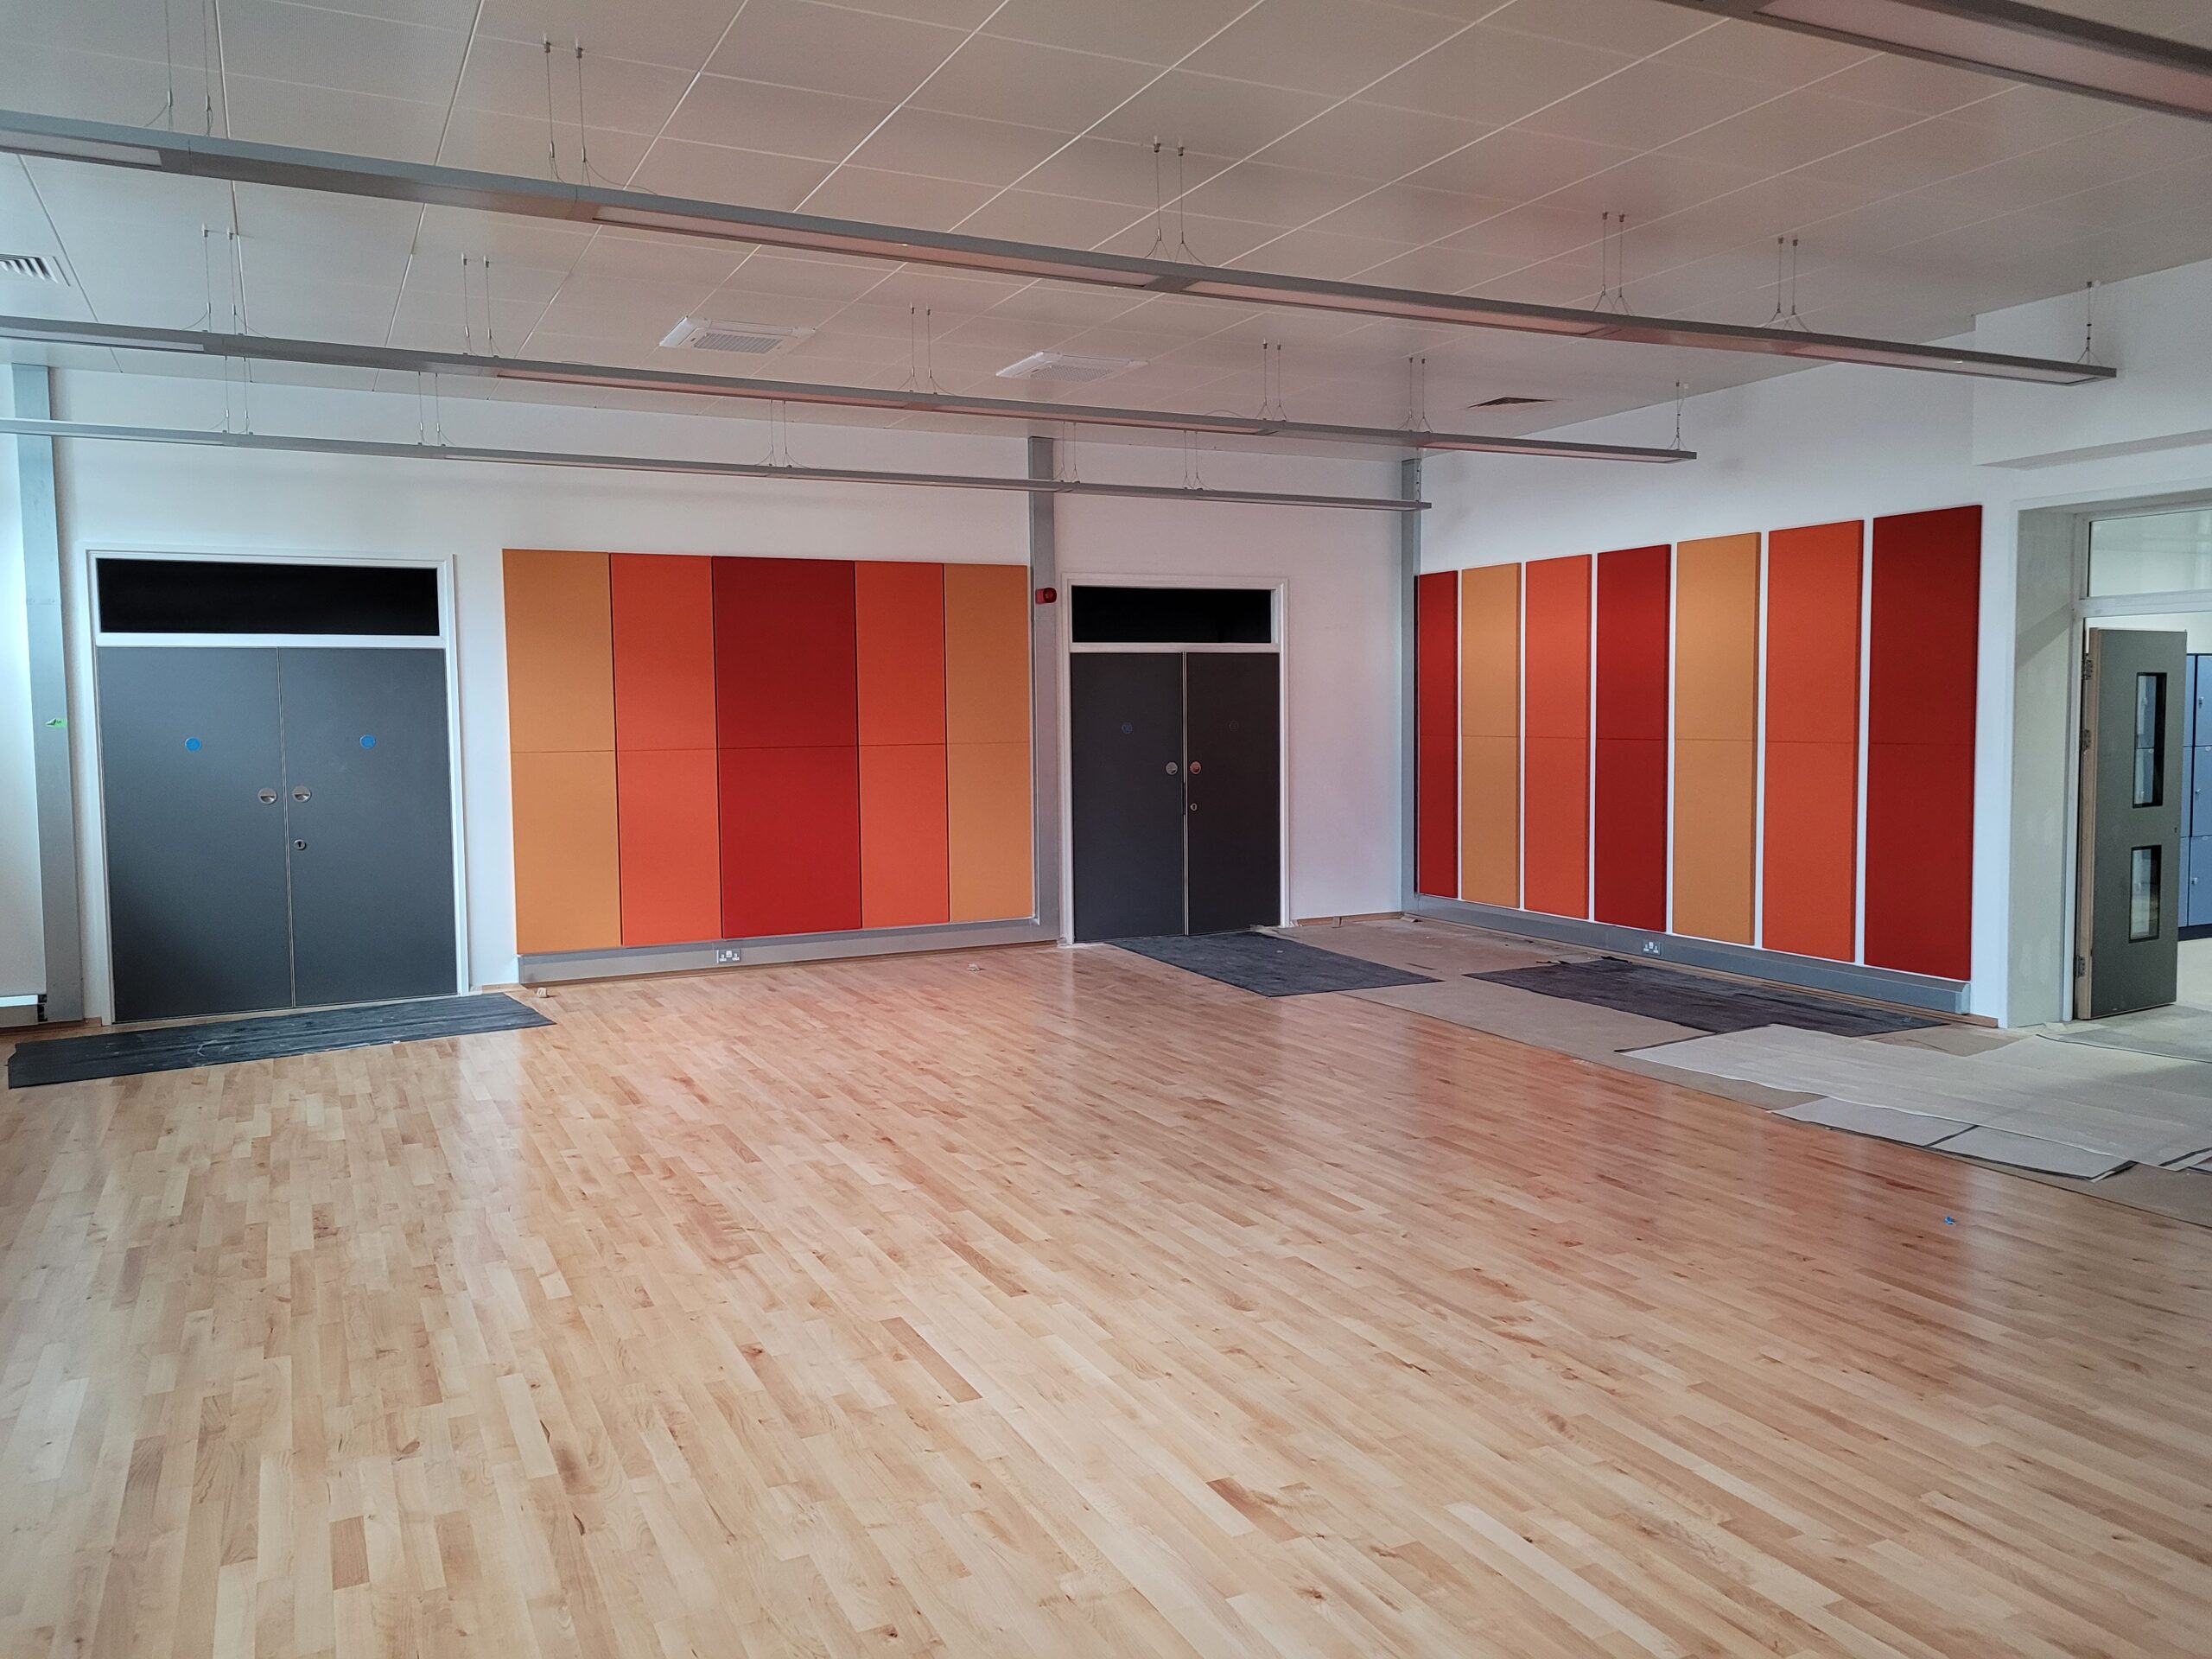 A new suspended ceiling and partition wall in a hall.